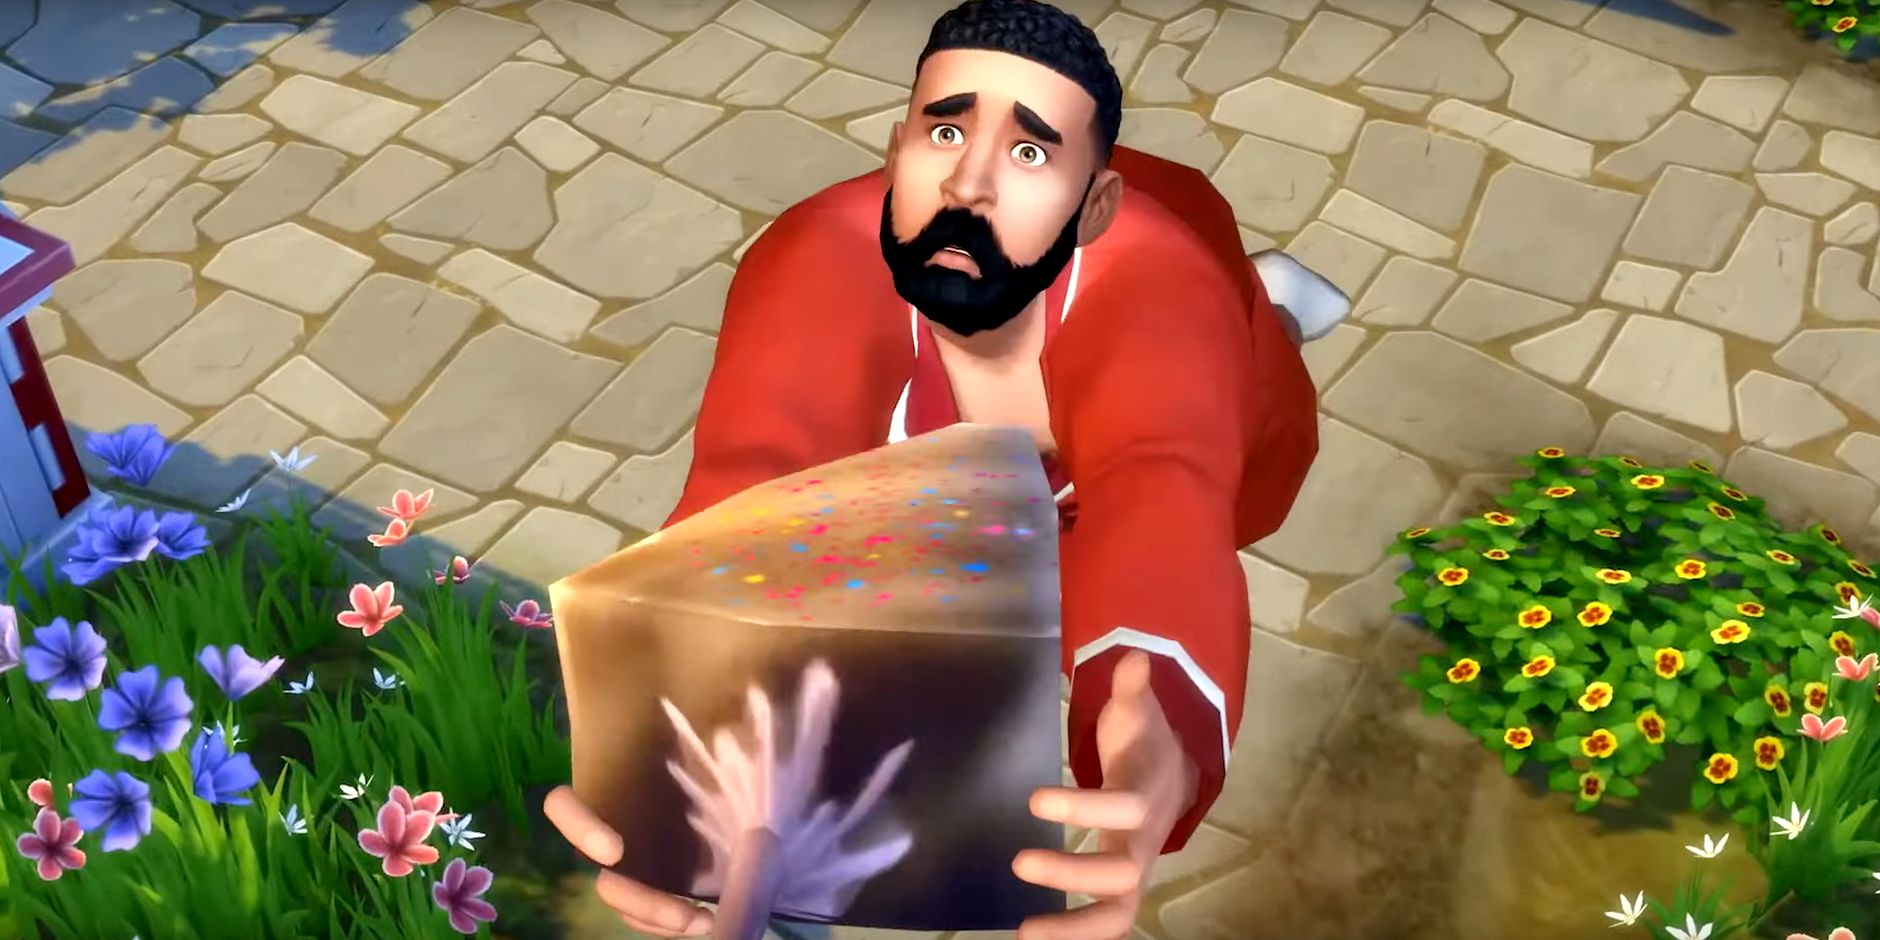 The Sims 4 Cowplant lures a Sim with a piece of cake.